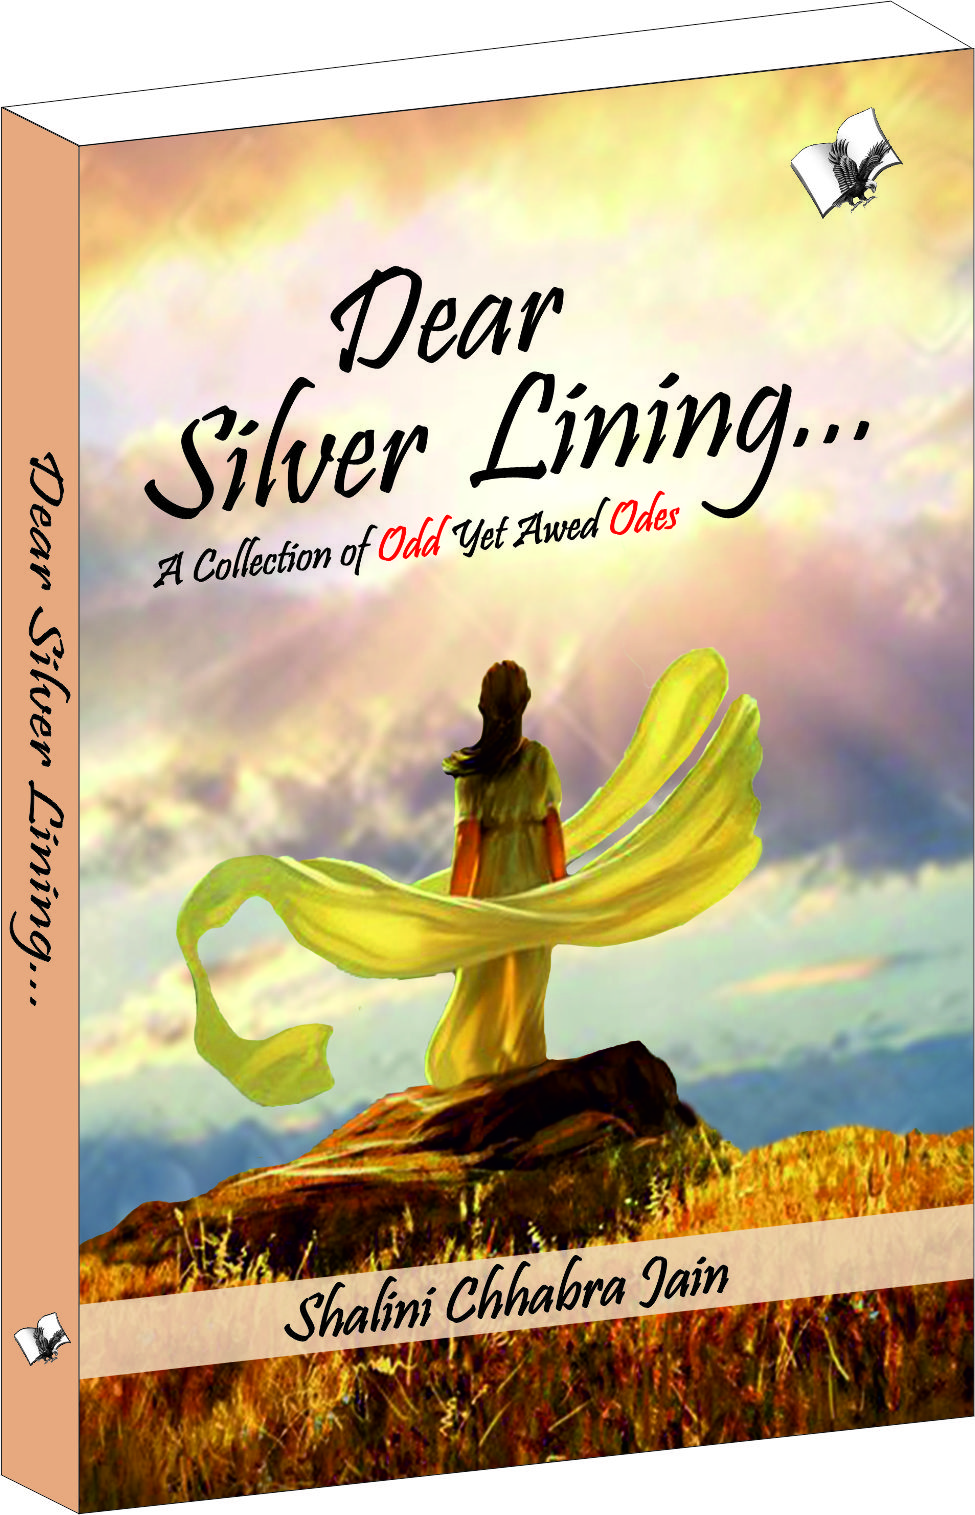 Dear Silver Lining...-A Collection of Odd Yet Awed Odes